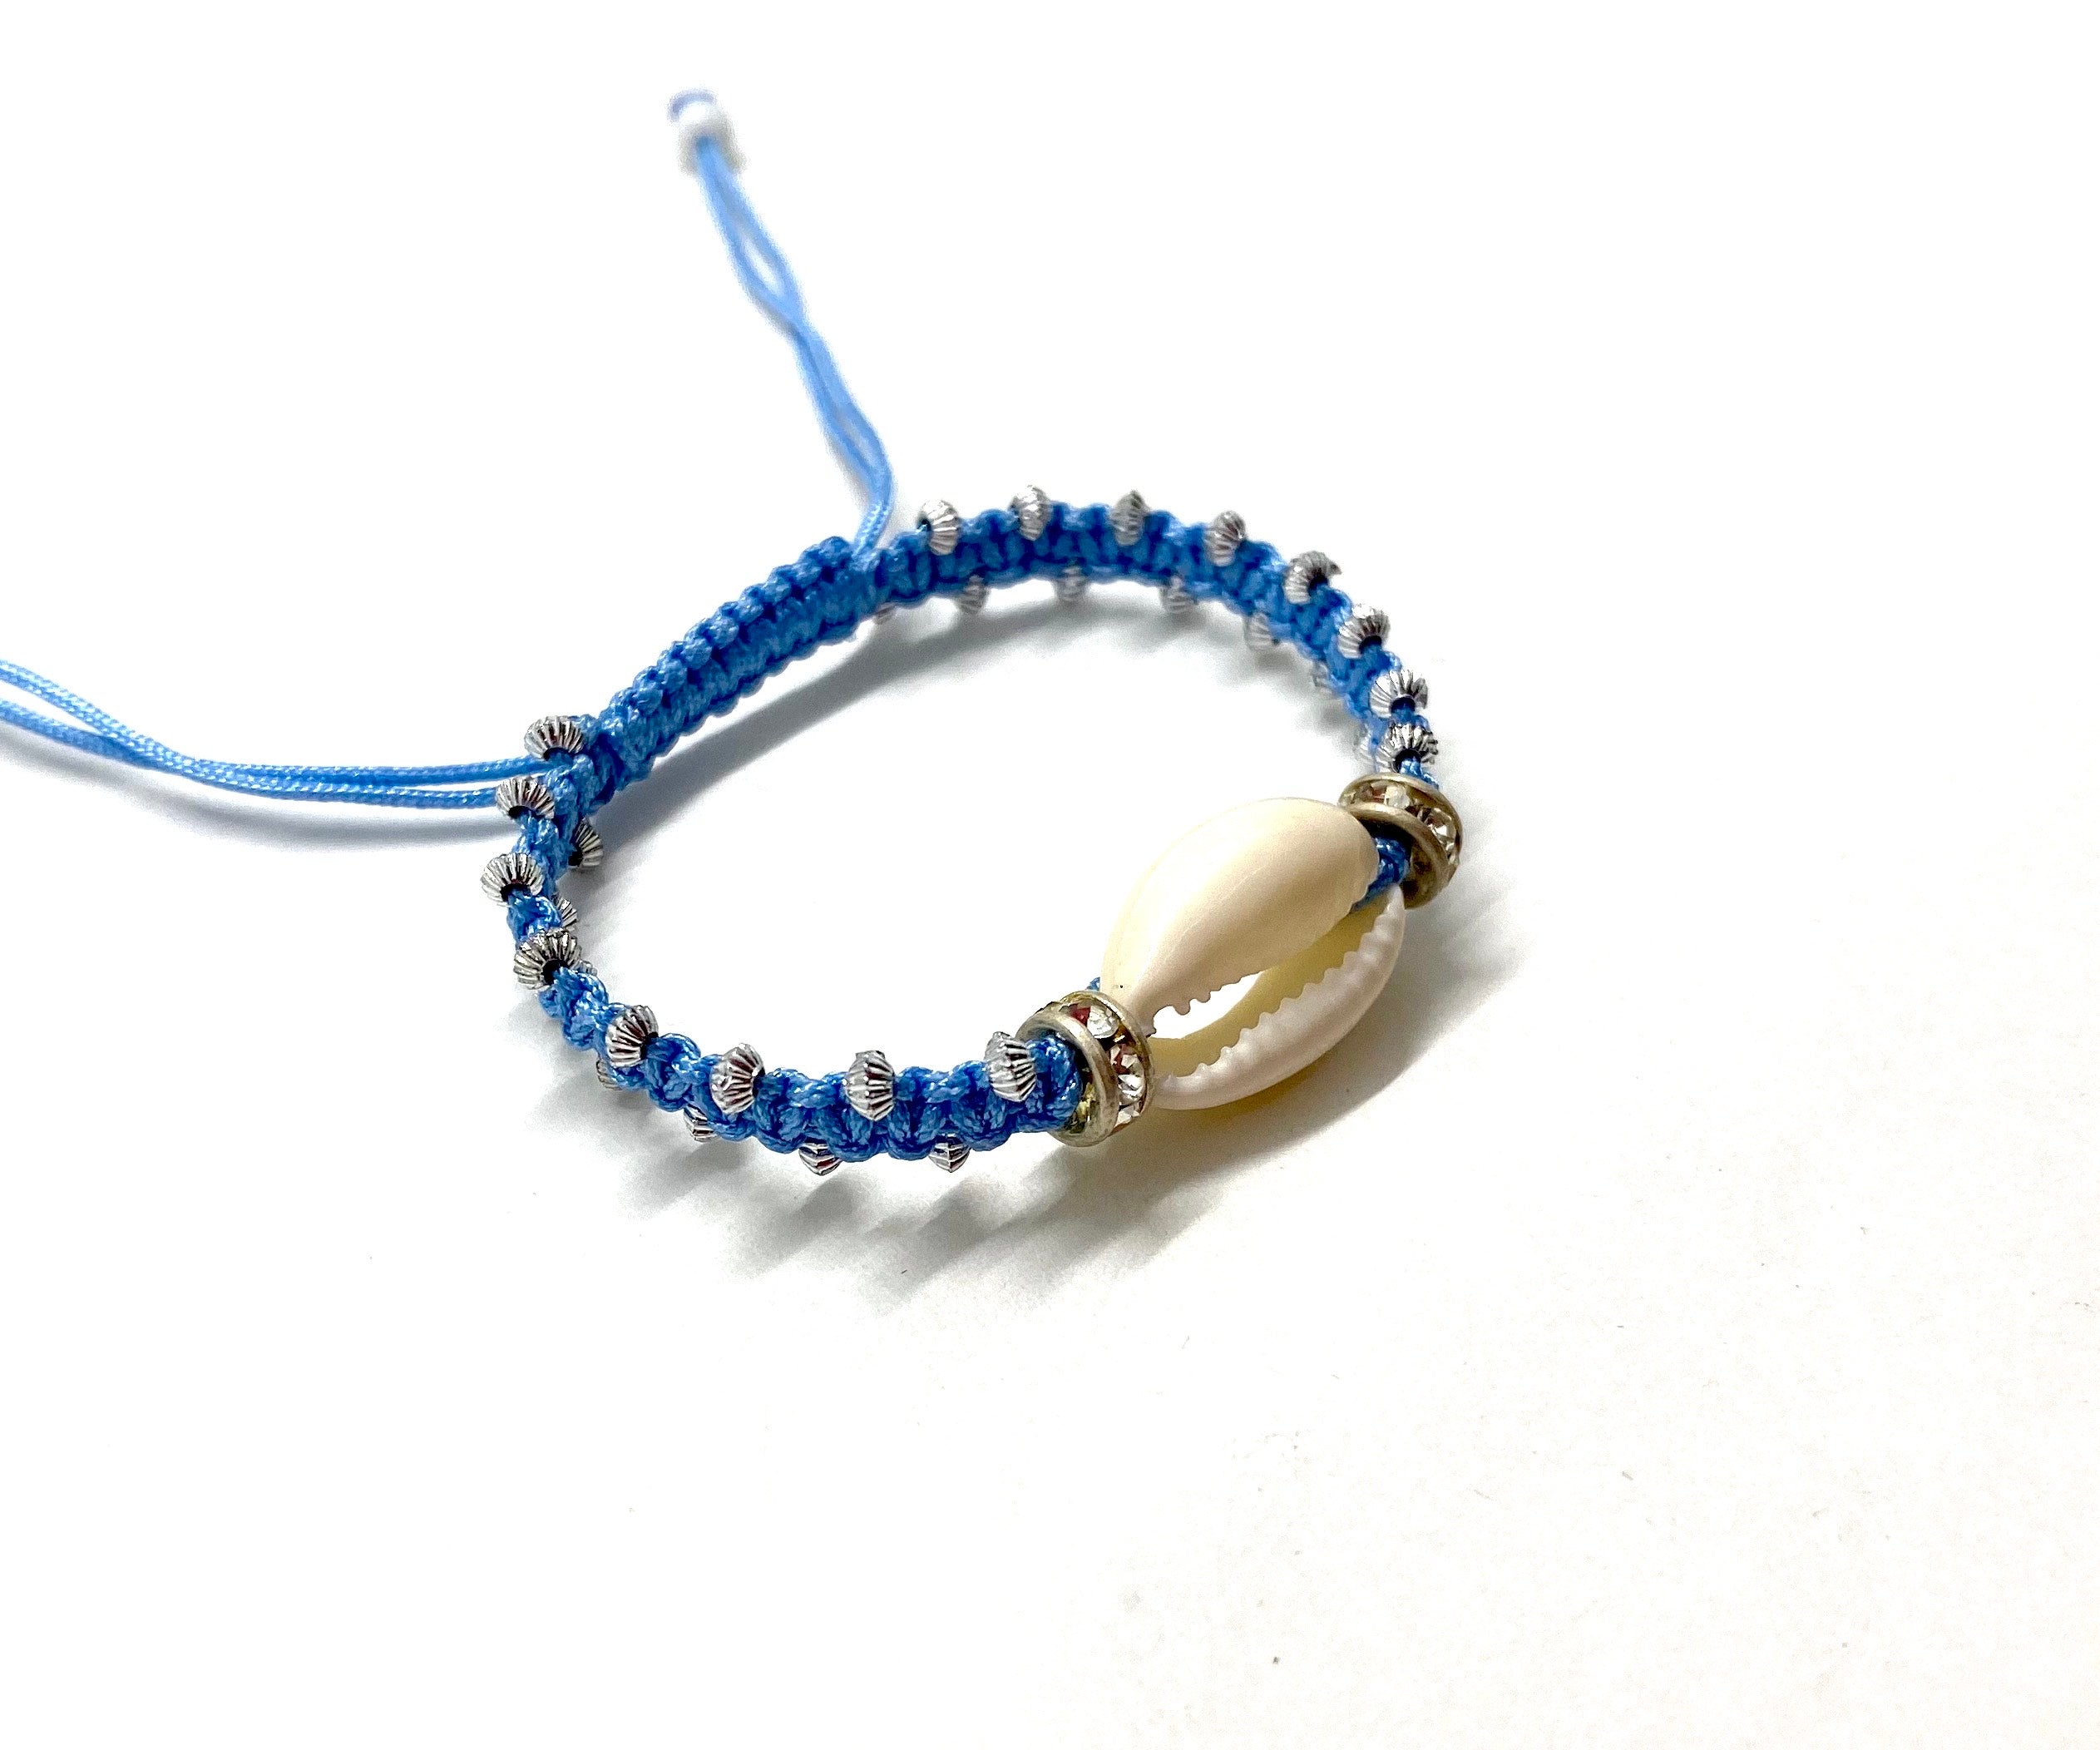 Natural shell bracelet, baby blue cord and gold toupee